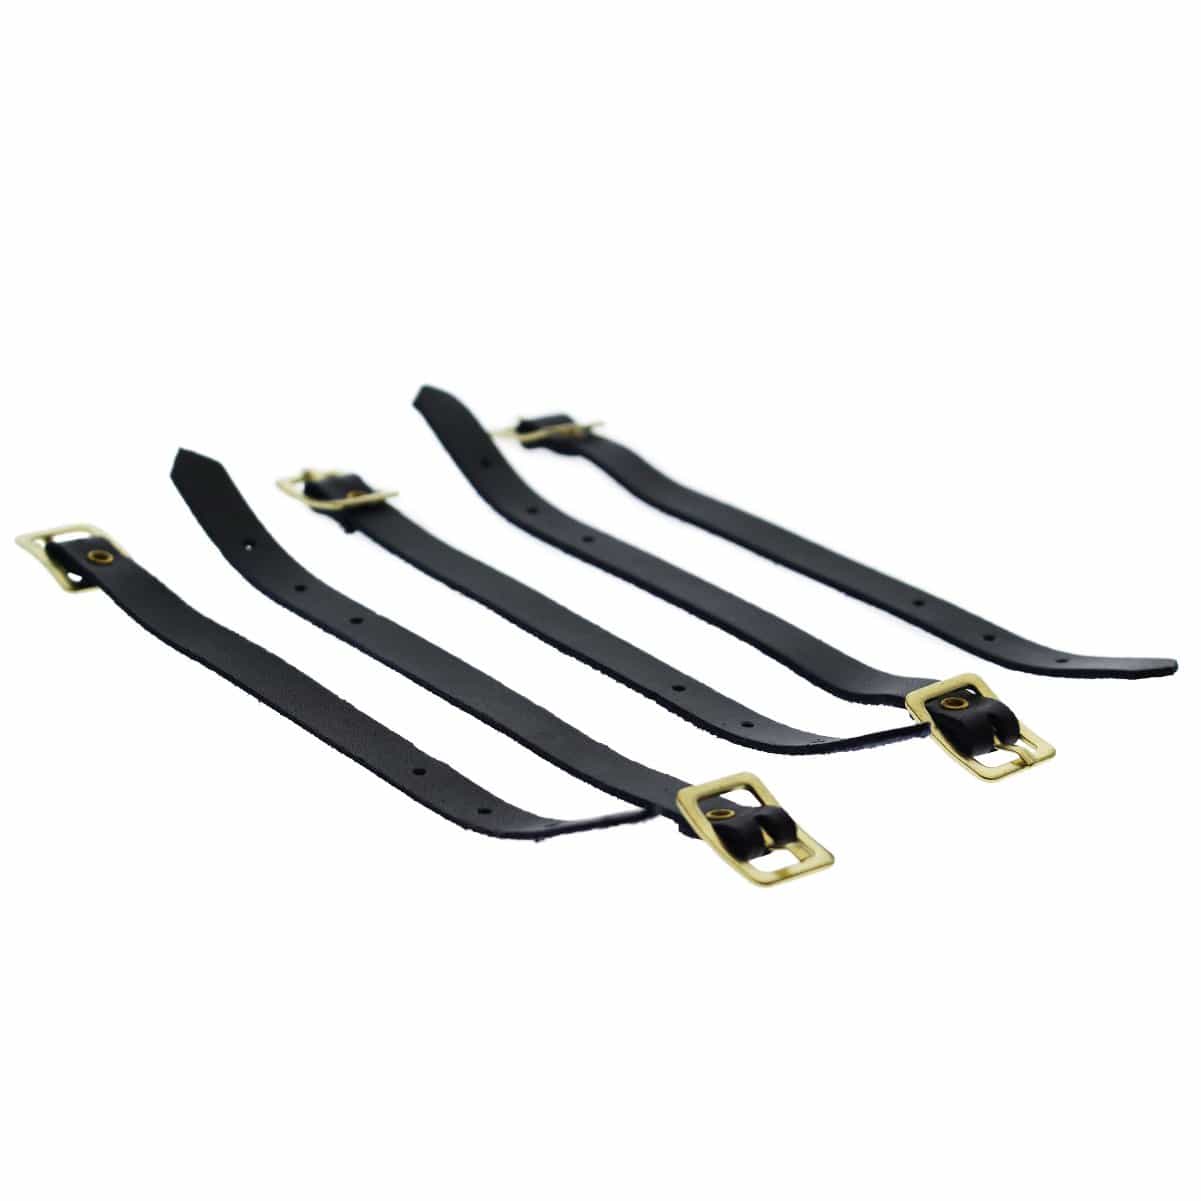 Black Genuine Leather Luggage Strap W/ Brass-Plated Buckle, 3 Holes  2420-1041 and more Leather Straps W/ Brass-Plated Steel Buckle W/ Adjustable  Strap at